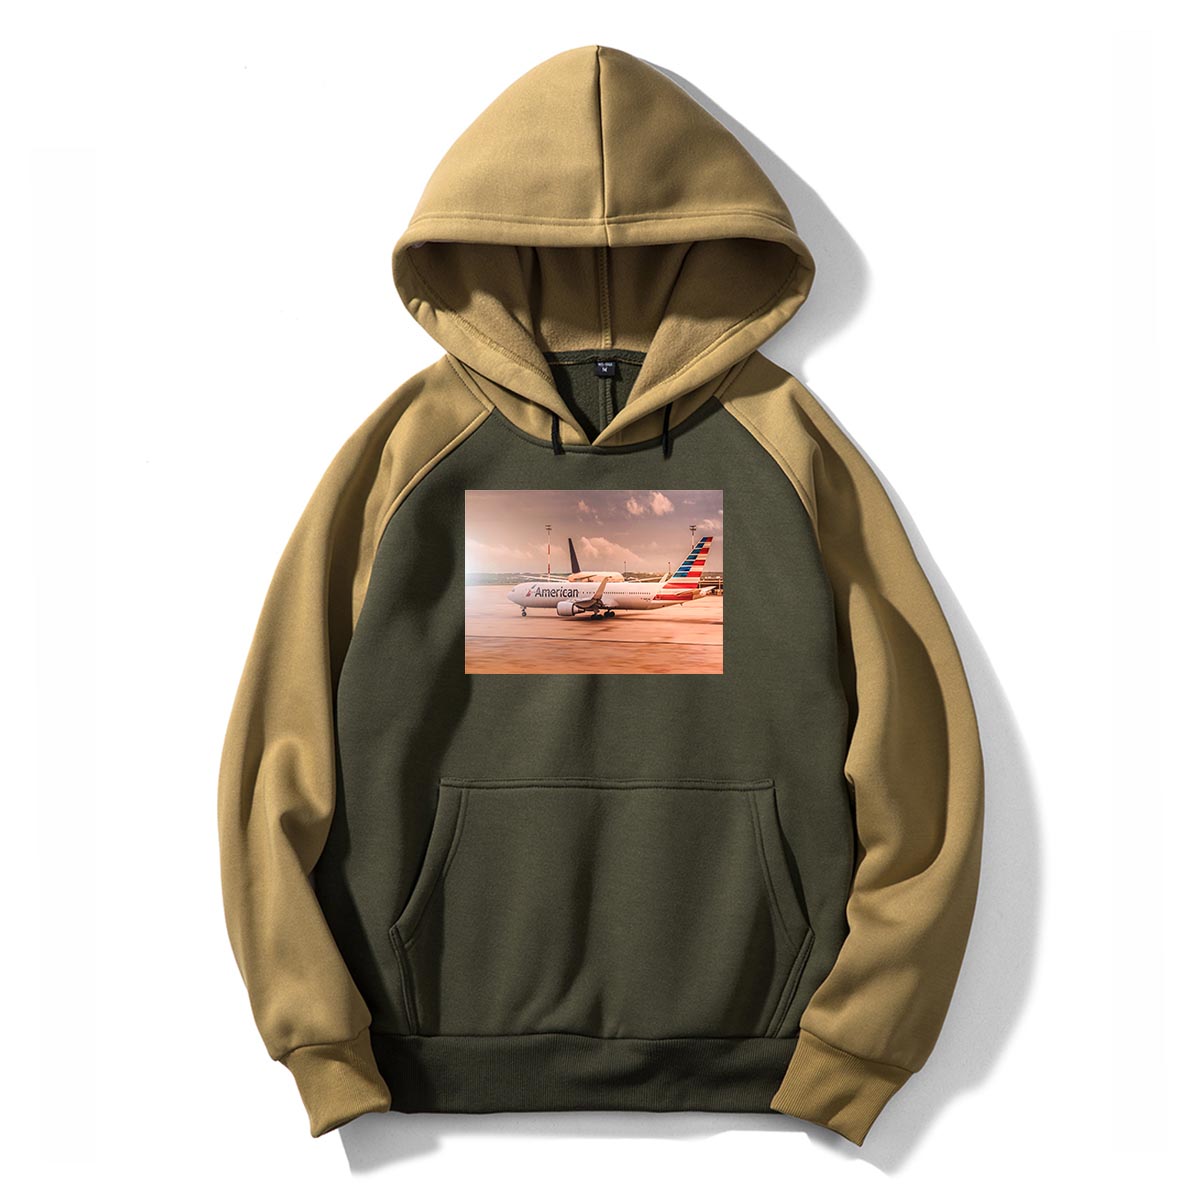 American Airlines Boeing 767 Designed Colourful Hoodies